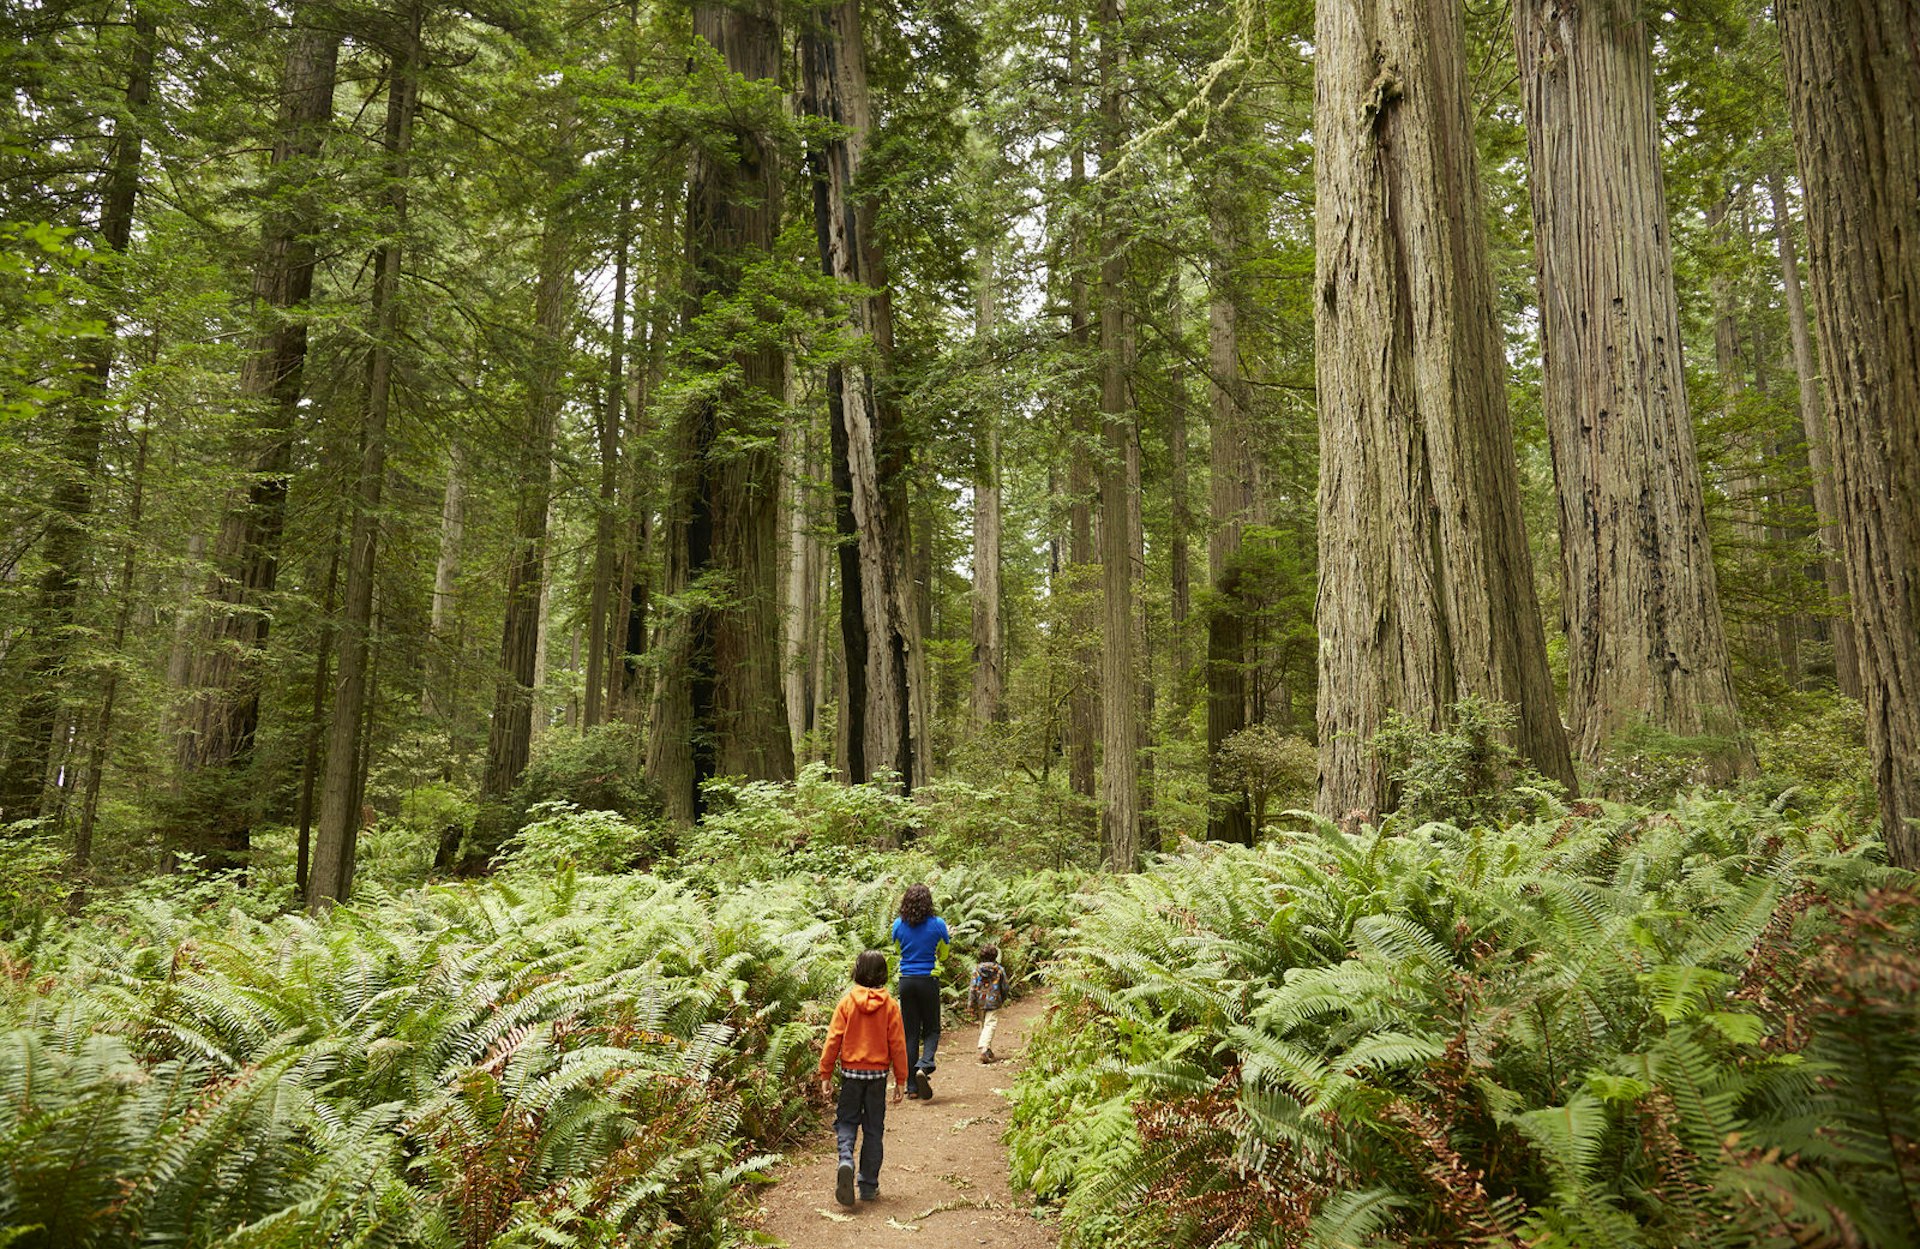 Three children walk together in the ferns and redwoods